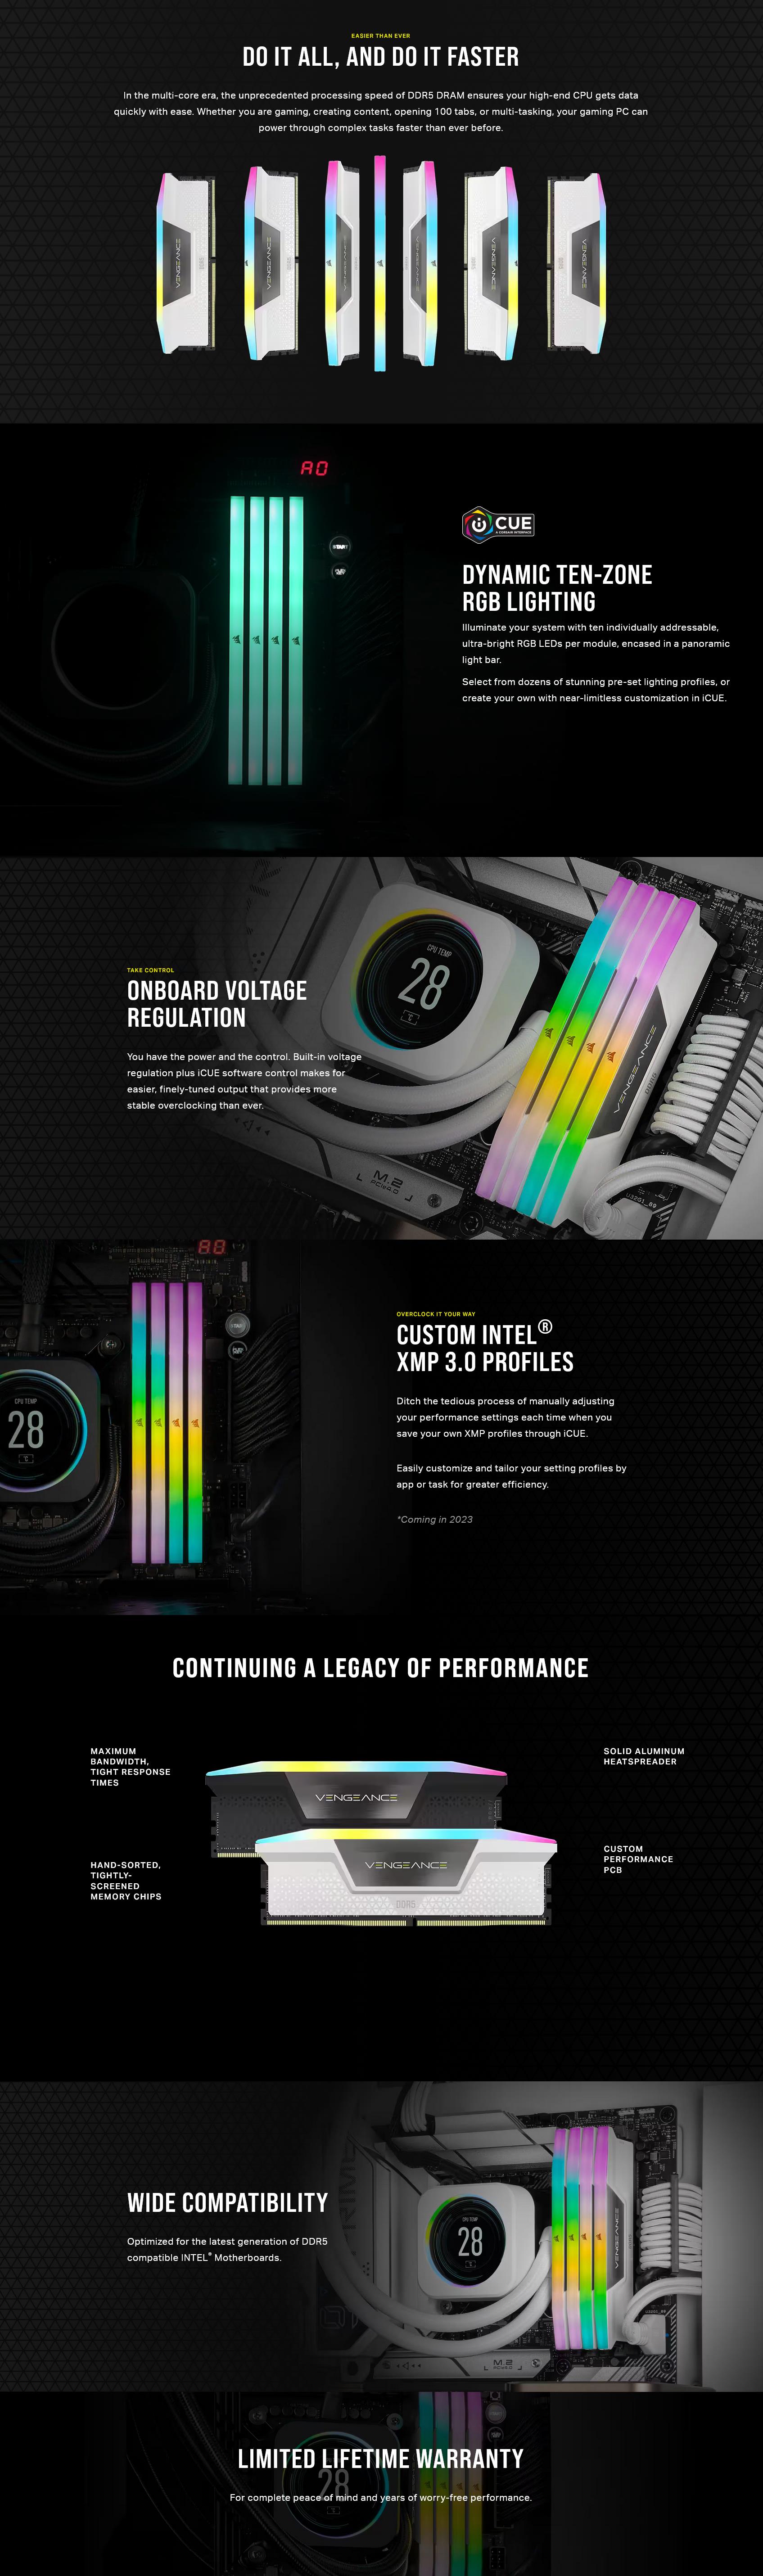 A large marketing image providing additional information about the product Corsair 48GB Kit (2x24GB) DDR5 Vengeance RGB C40 7000MT/s - Black - Additional alt info not provided